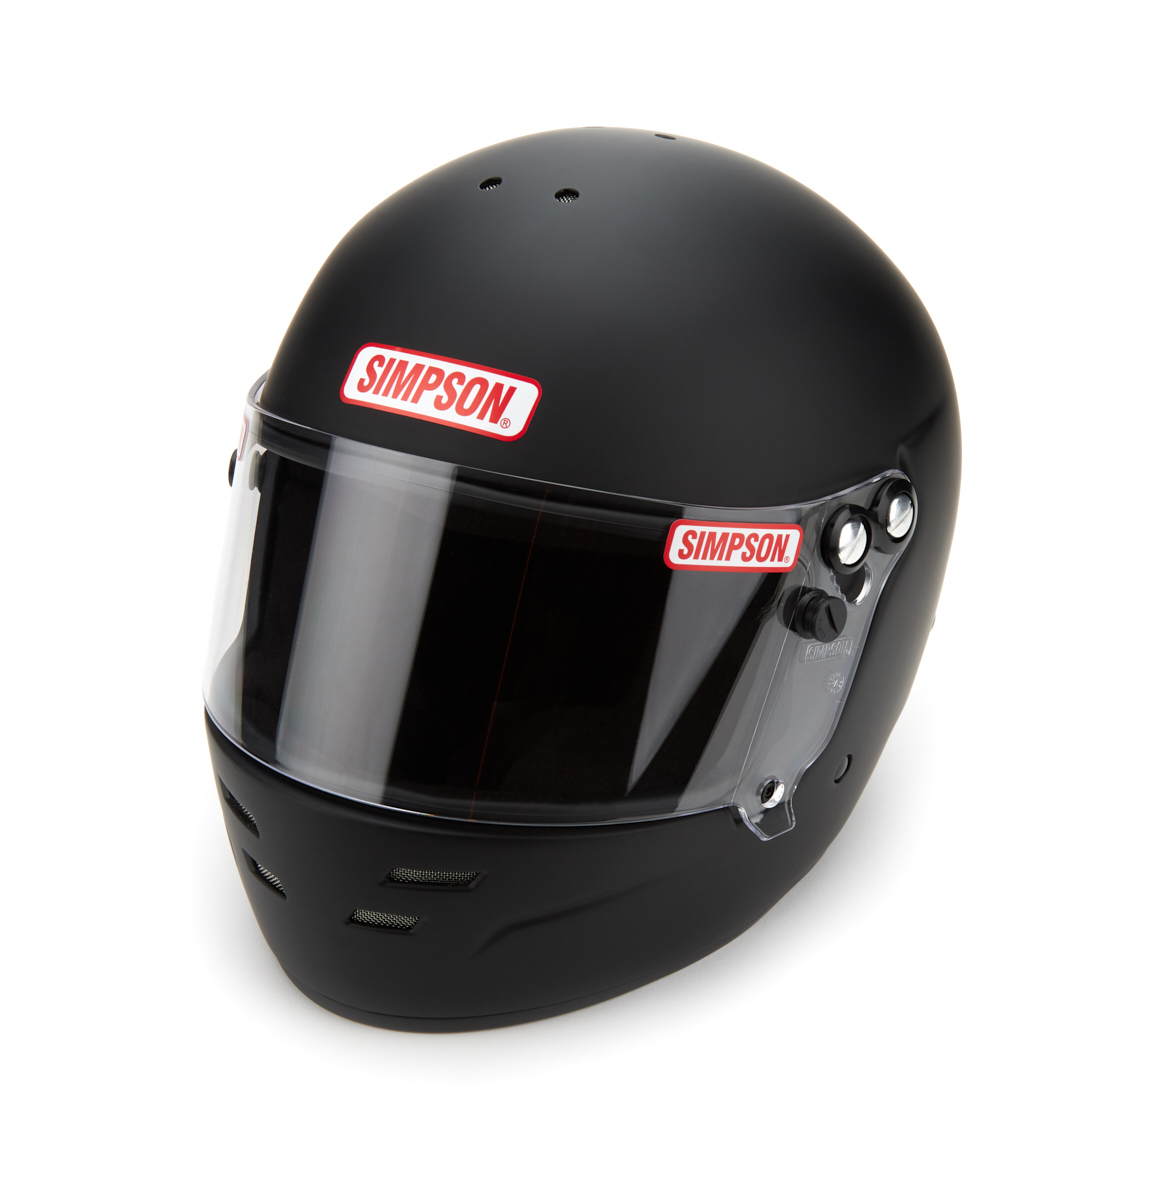 Simpson Safety 7100048 Helmet, Viper, Full Face, Snell SA2020, Head and Neck Support Ready, Flat Black, X-Large, Each